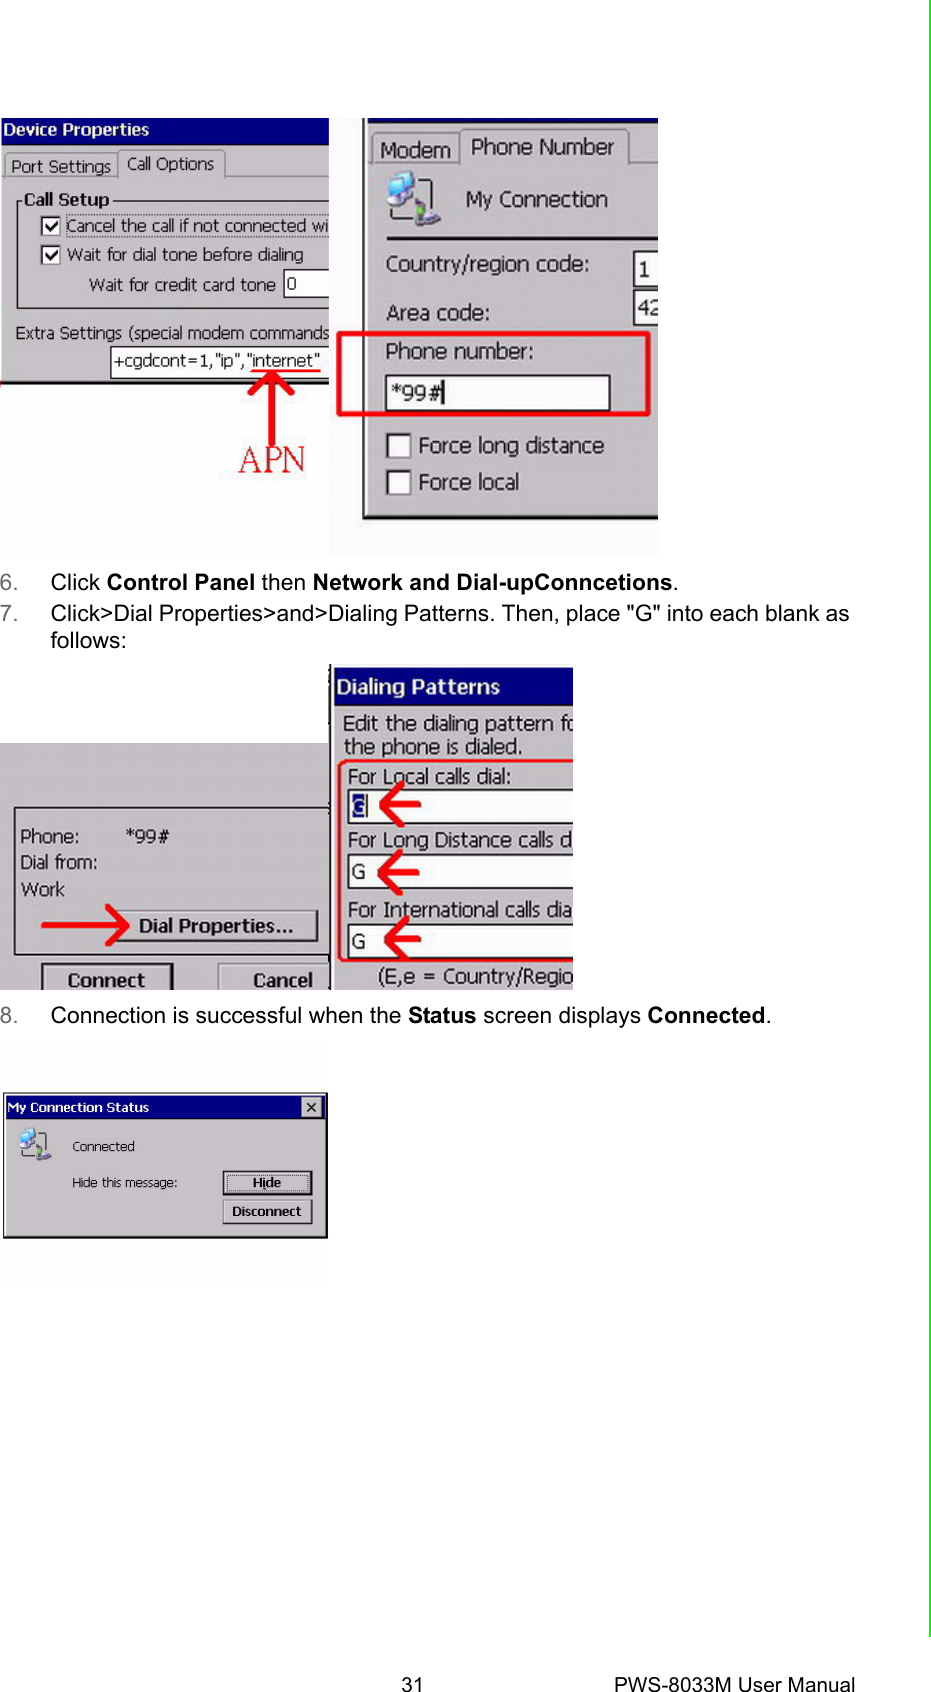 31 PWS-8033M User ManualChapter 4 Getting Connected6. Click Control Panel then Network and Dial-upConncetions.7. Click&gt;Dial Properties&gt;and&gt;Dialing Patterns. Then, place &quot;G&quot; into each blank as follows:8. Connection is successful when the Status screen displays Connected.